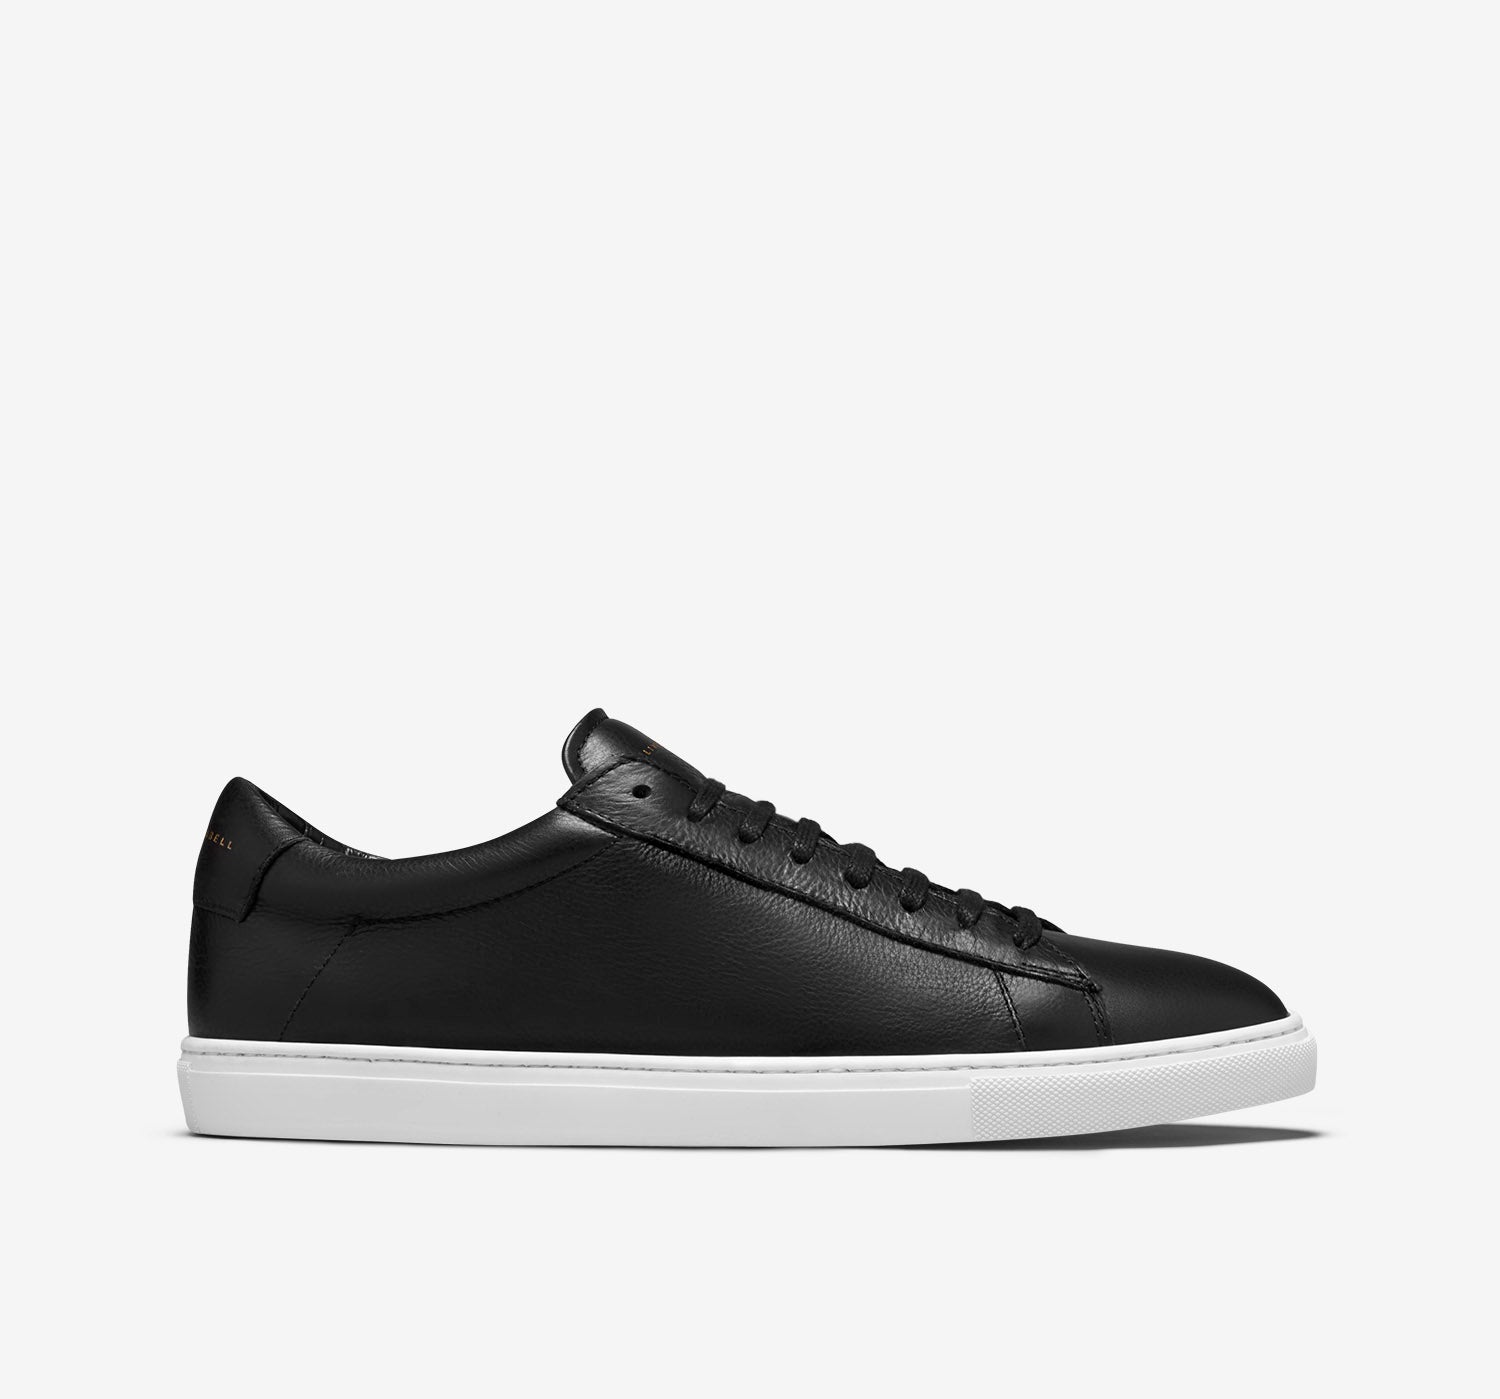 oliver cabell white sneakers